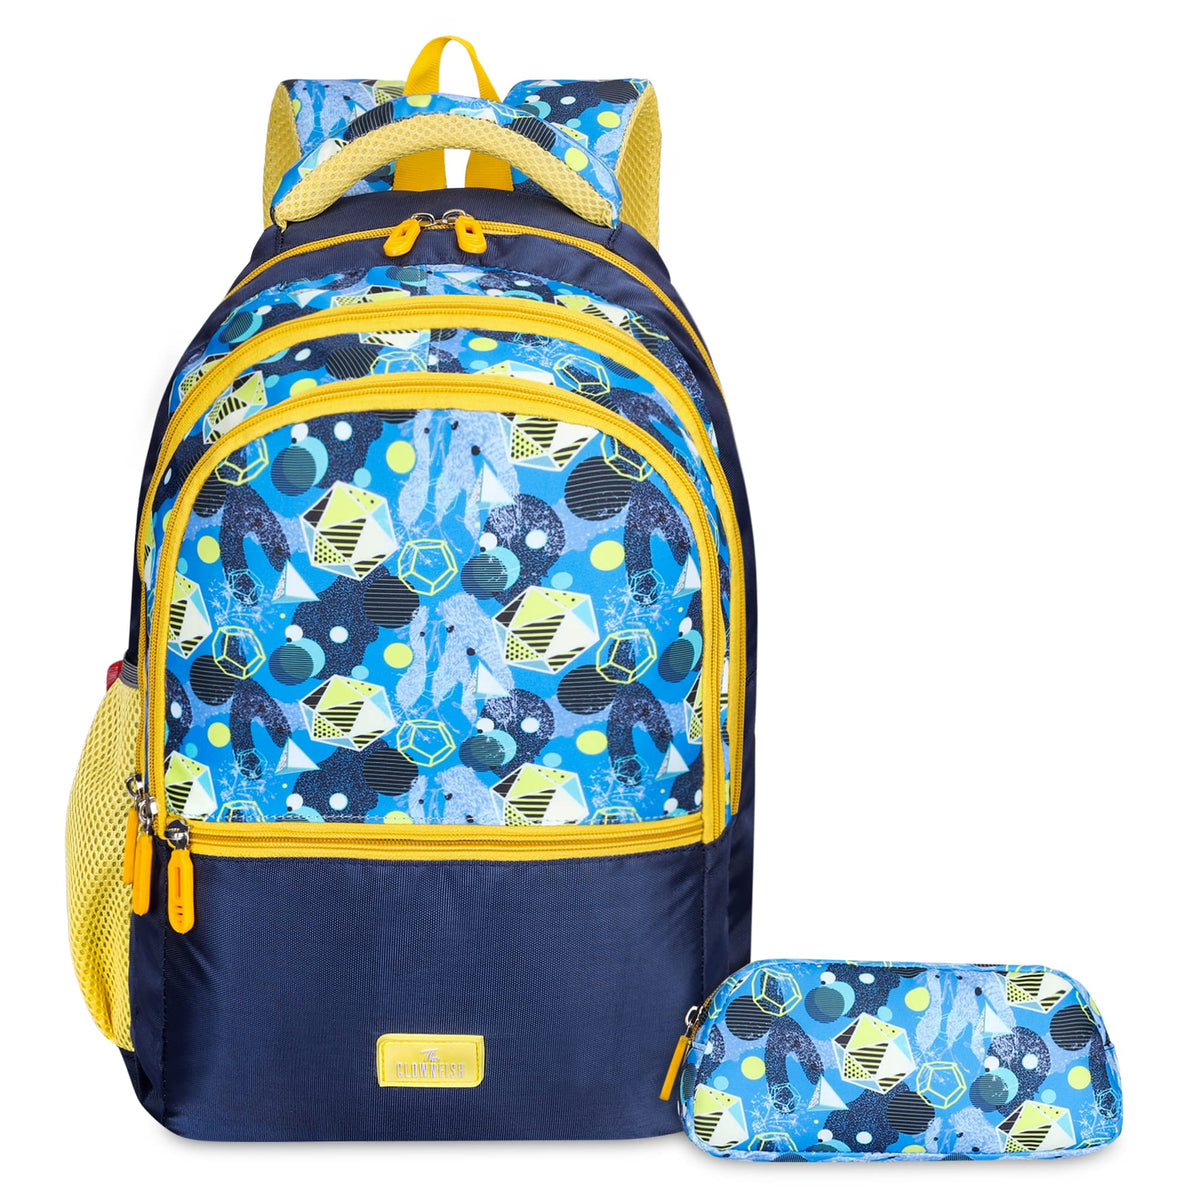 The Clownfish Edutrek Series Printed Polyester 33.5 L School Backpack with Pencil/Stationery Pouch School Bag Front Zip Pocket Daypack Picnic Bag For School Going Boys & Girls Age-10+ years (Light Blue)